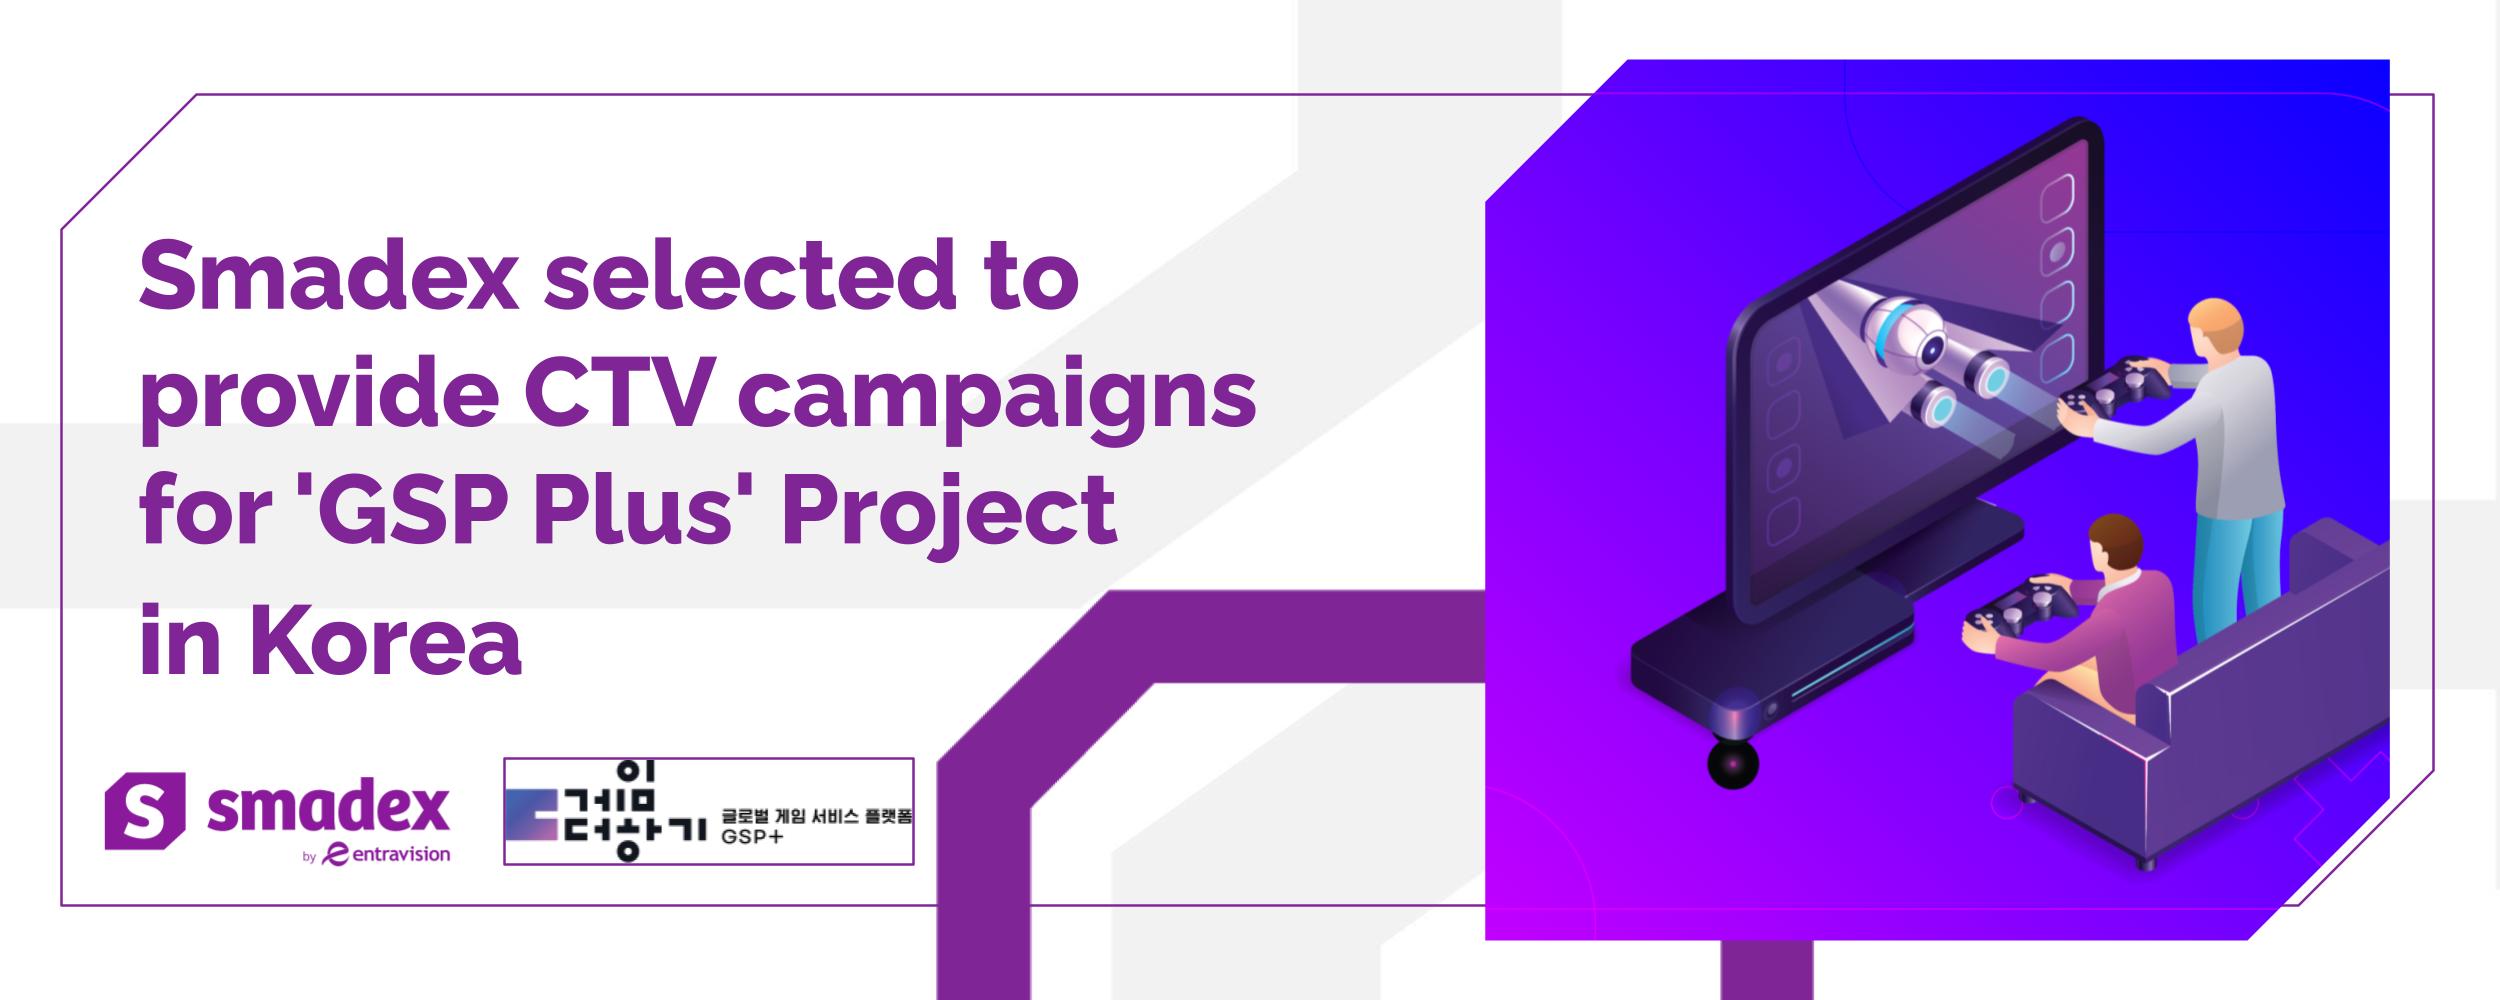 Smadex selected to provide CTV campaigns for 'GSP Plus' Project in Korea